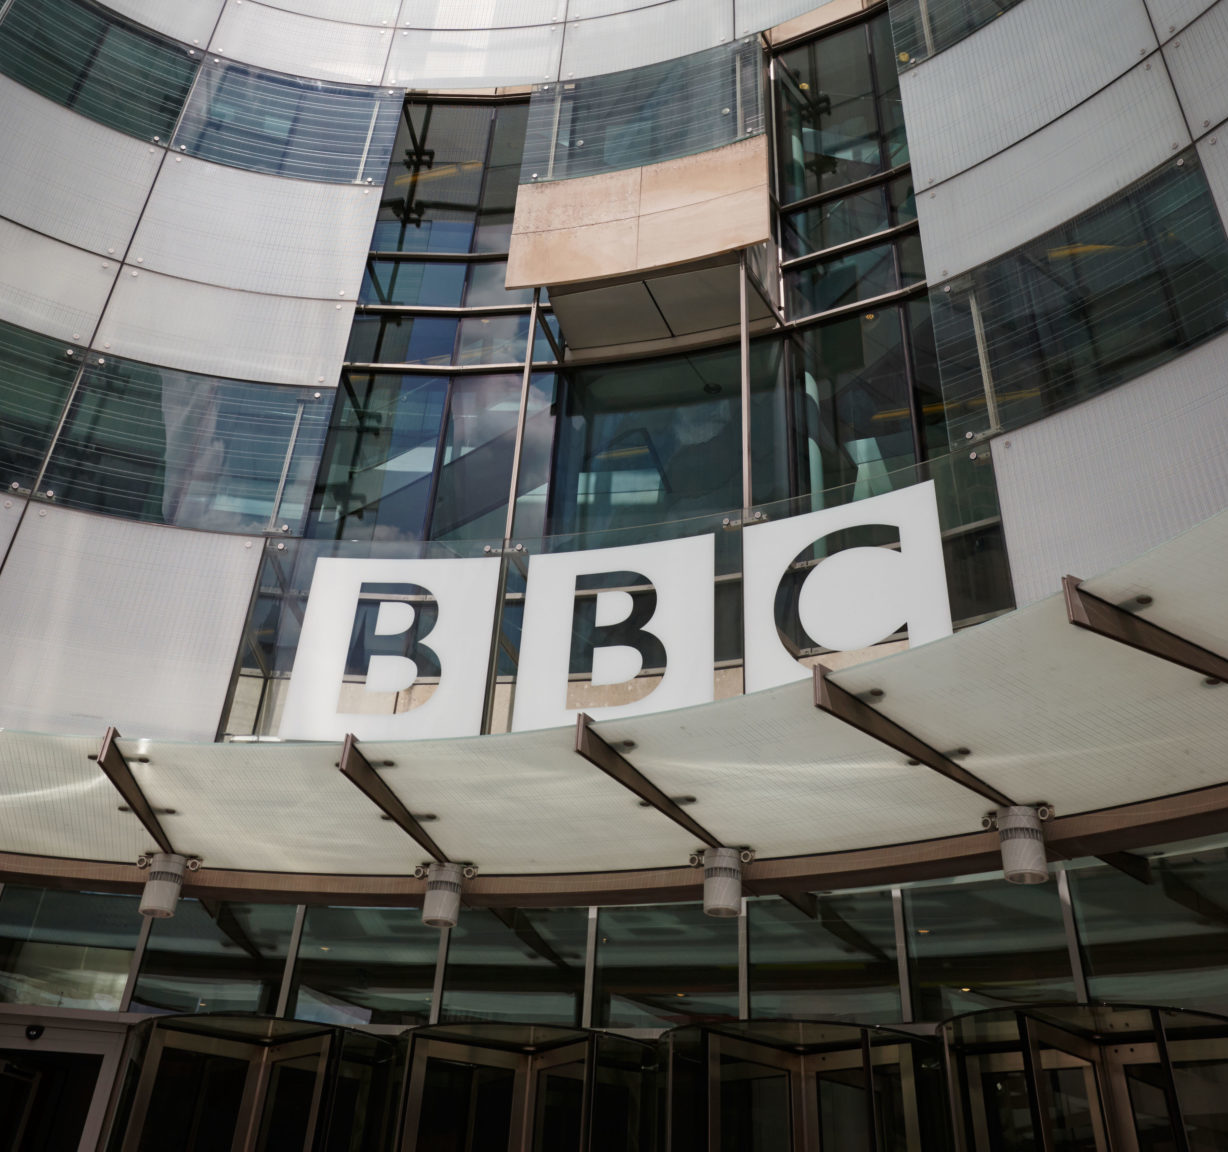 BBC's Broadcasting House is seen in London, England in July 2013.